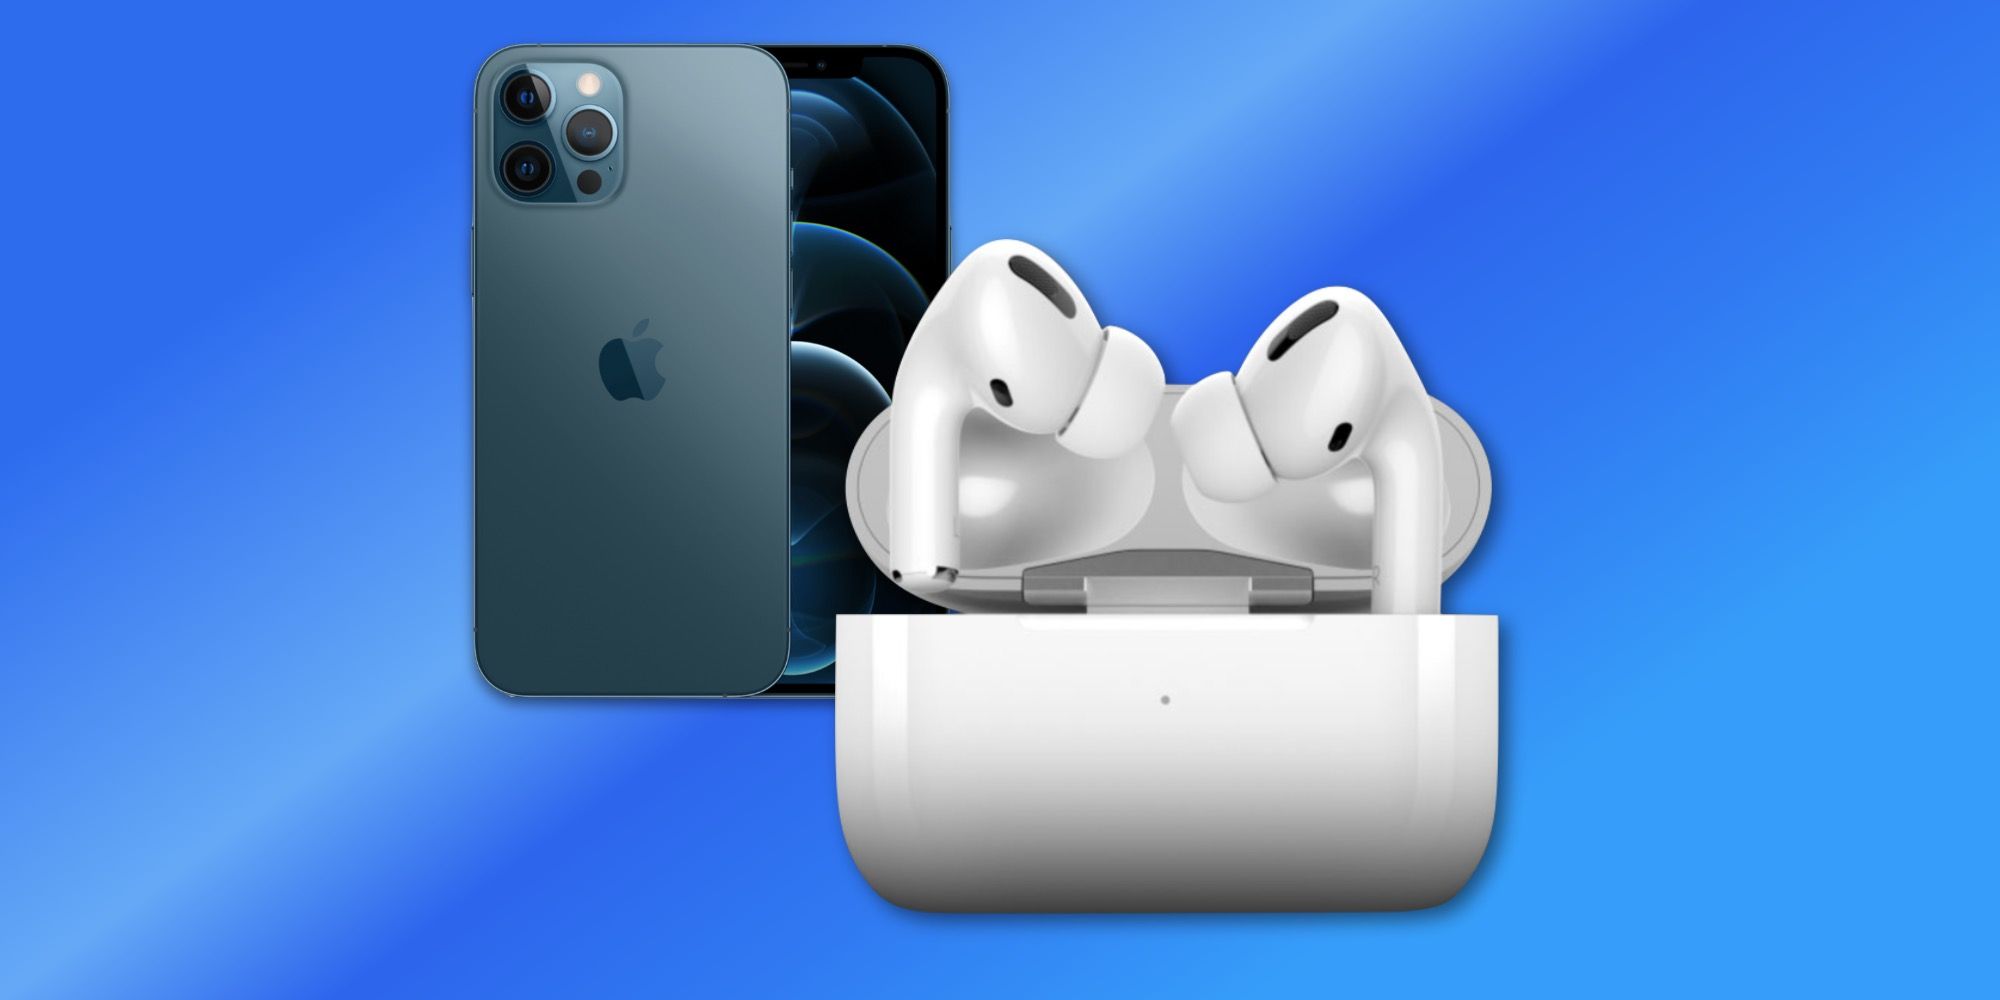 Apple AirPods Pro with charger &amp; iPhone 12 Pro on blue